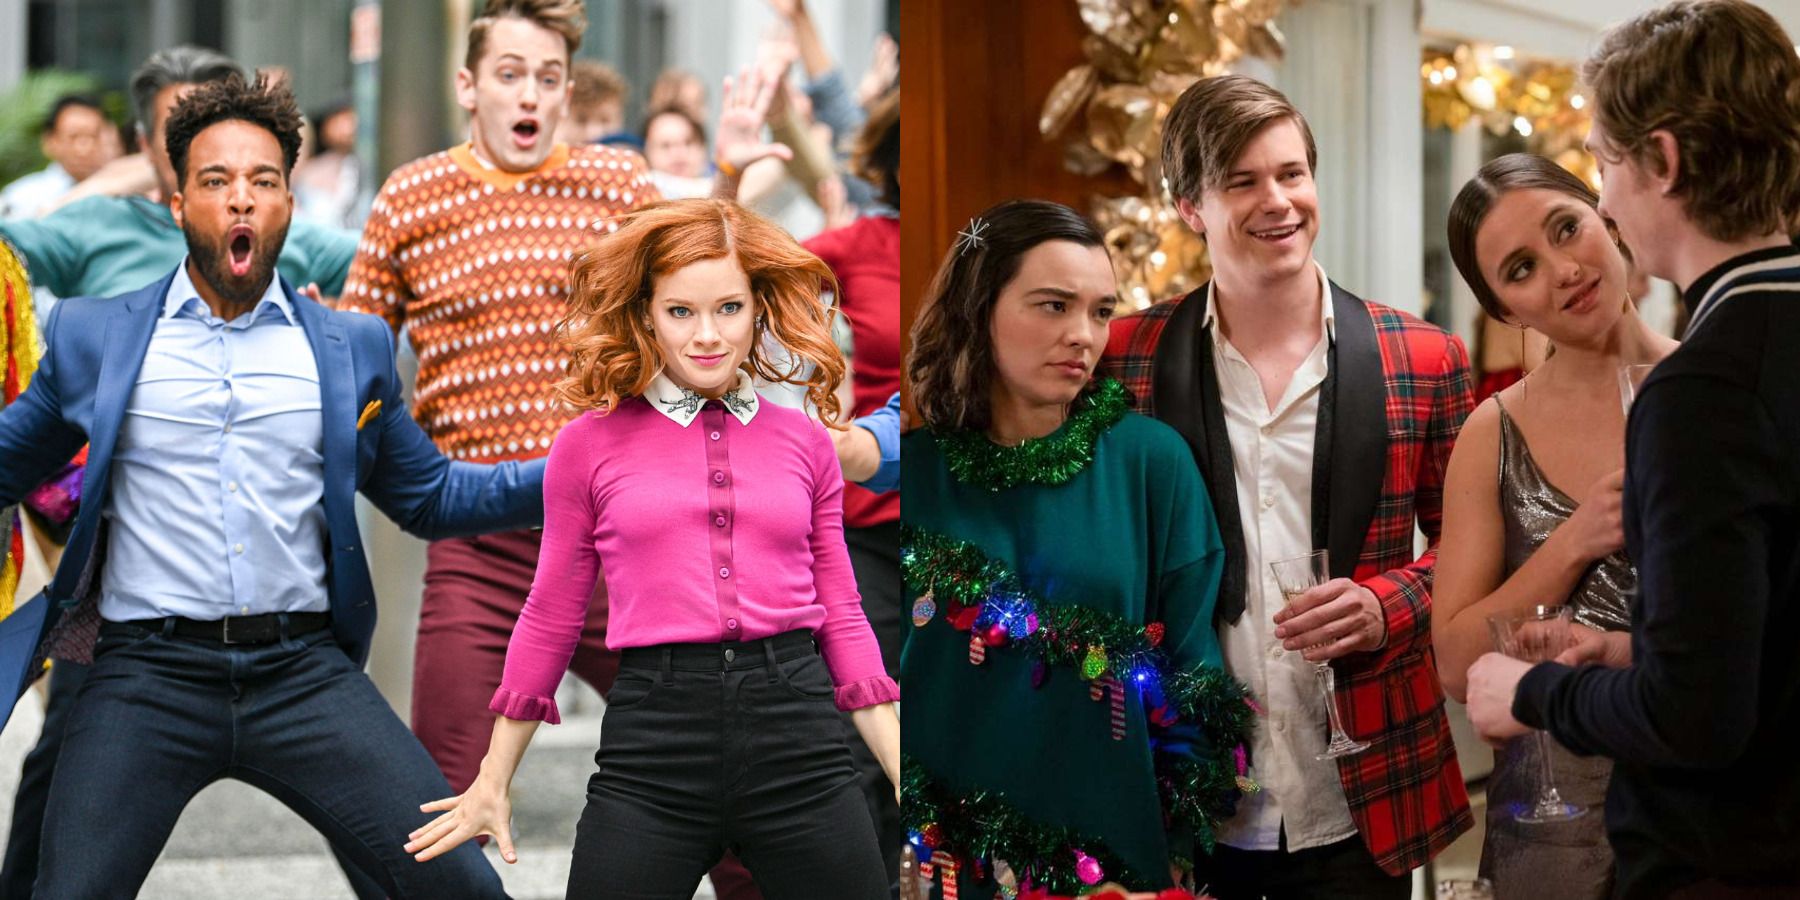 Canceled shows 2020s feature split image Zoey's Extraordinary Playlist and Dash and Lily